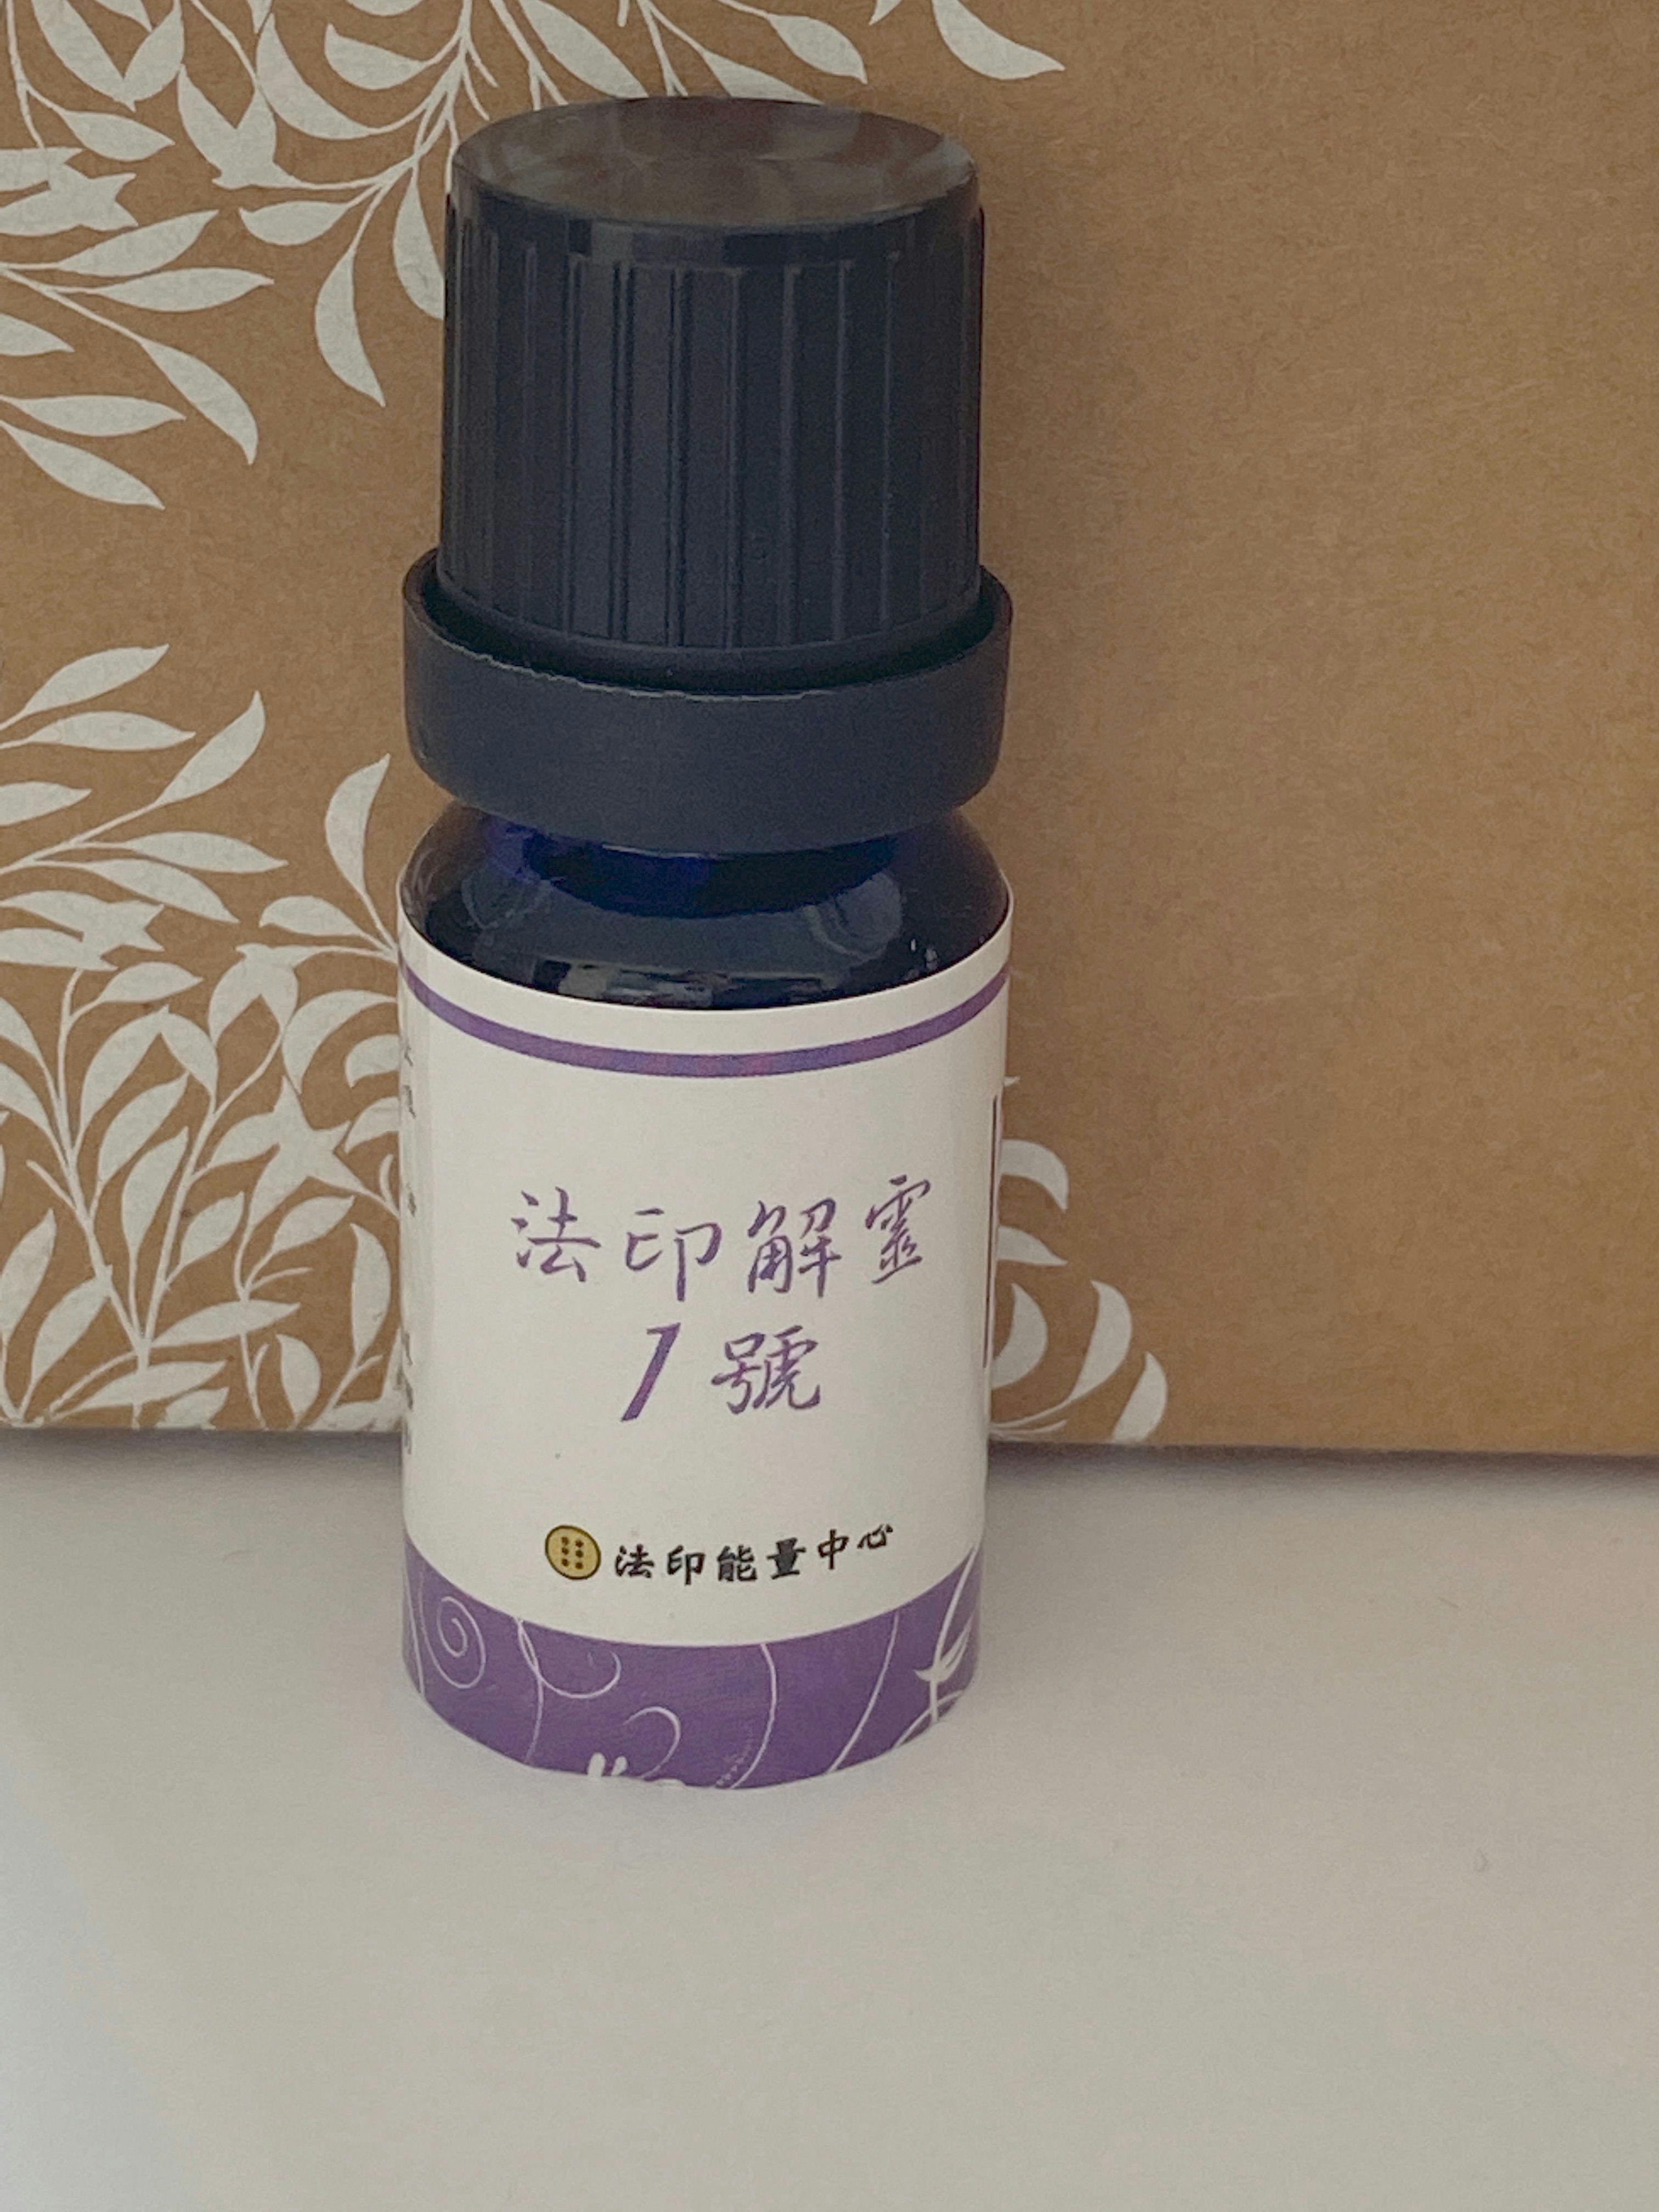 Cover Image for product: 法印 1號 解靈精油-10ml